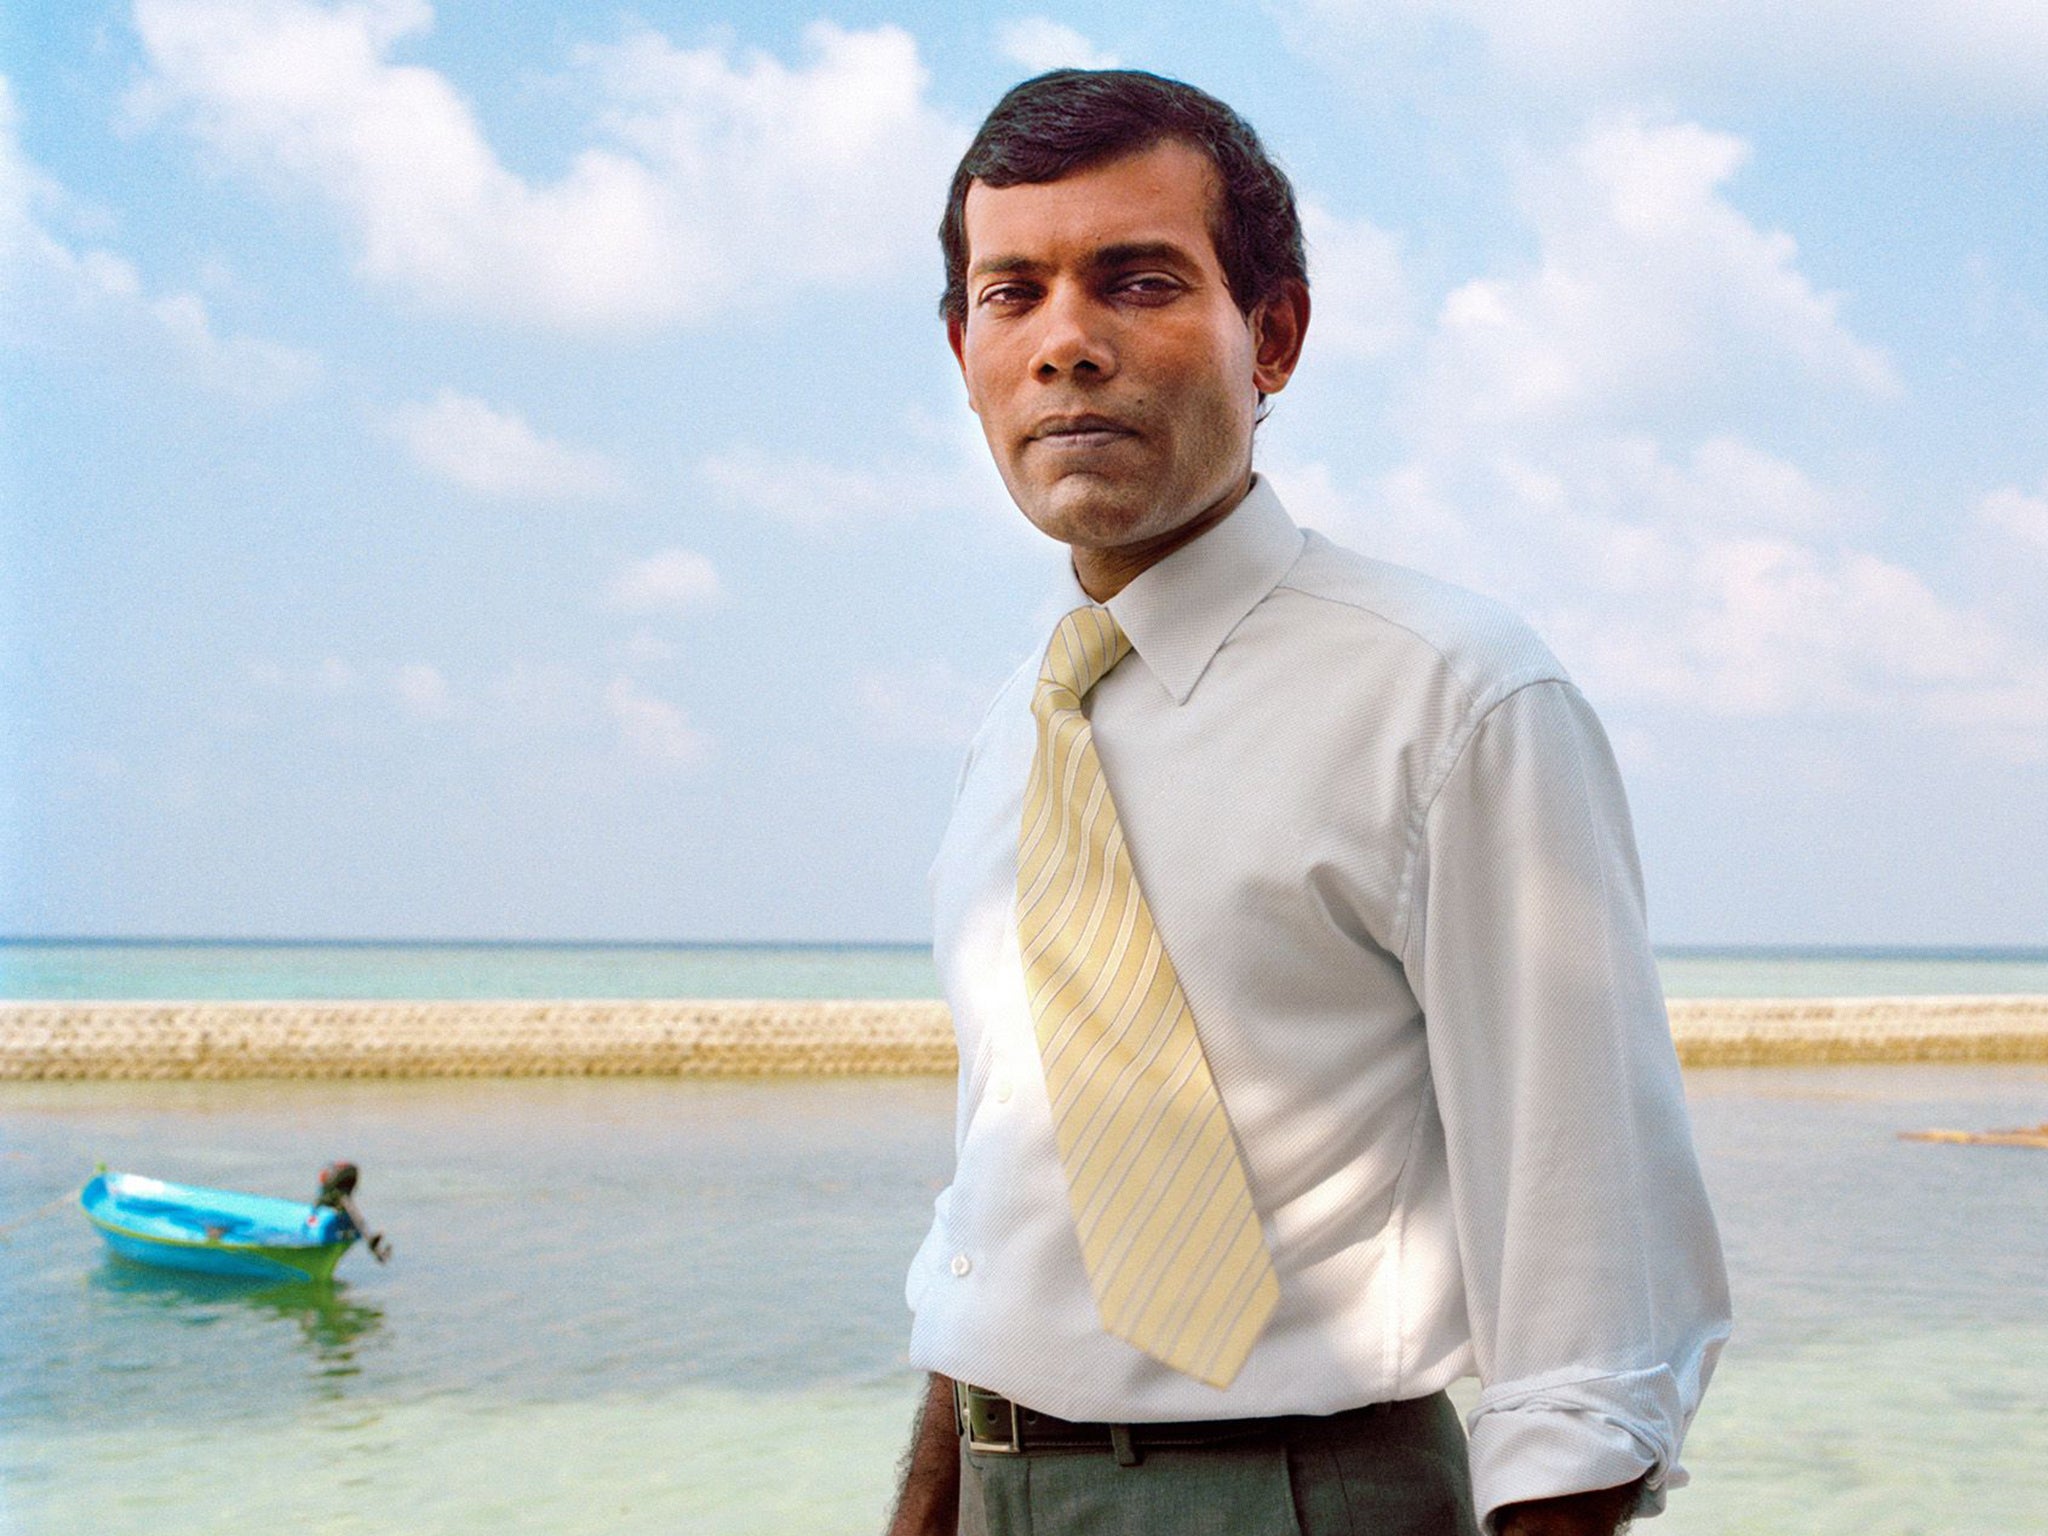 Journalist Mohamed Nasheed, pictured, succeeded in toppling President Maumoon Gayoom just five years after he formed the Maldivian Democratic Party